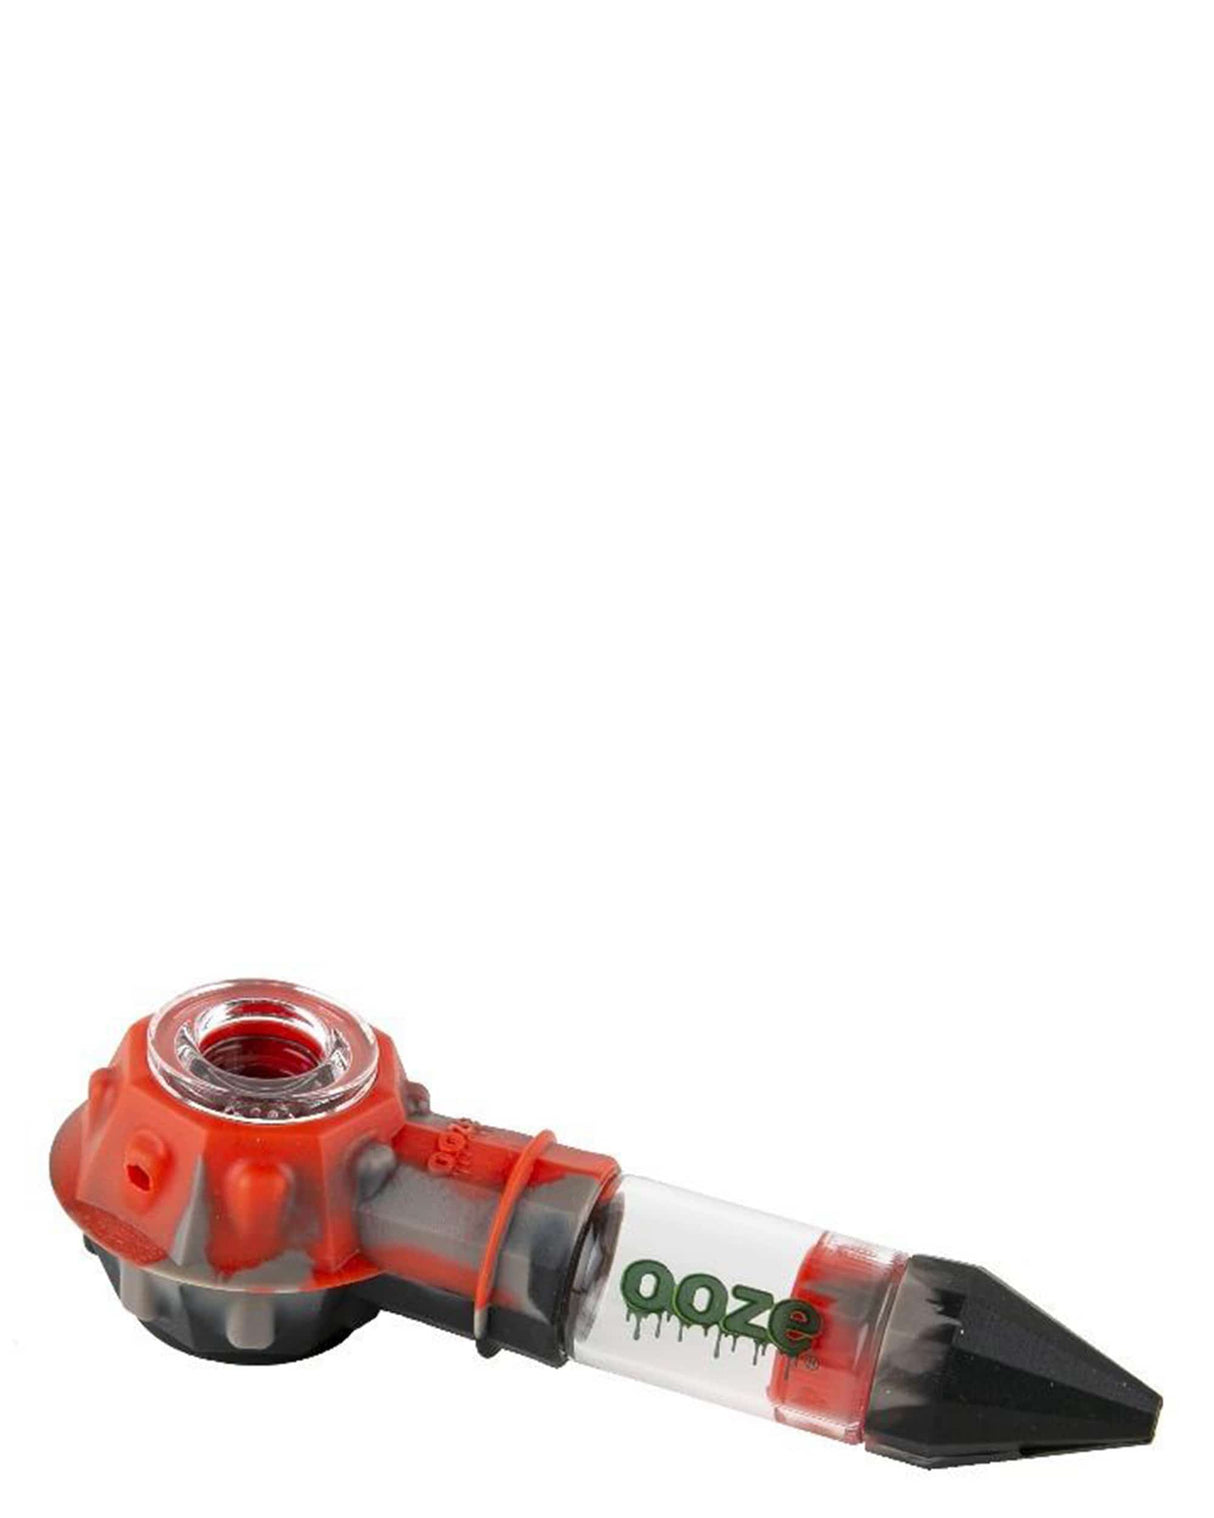 Ooze Bowser Silicone Pipe in red and gray, 4" spoon design with quartz bowl, angled side view